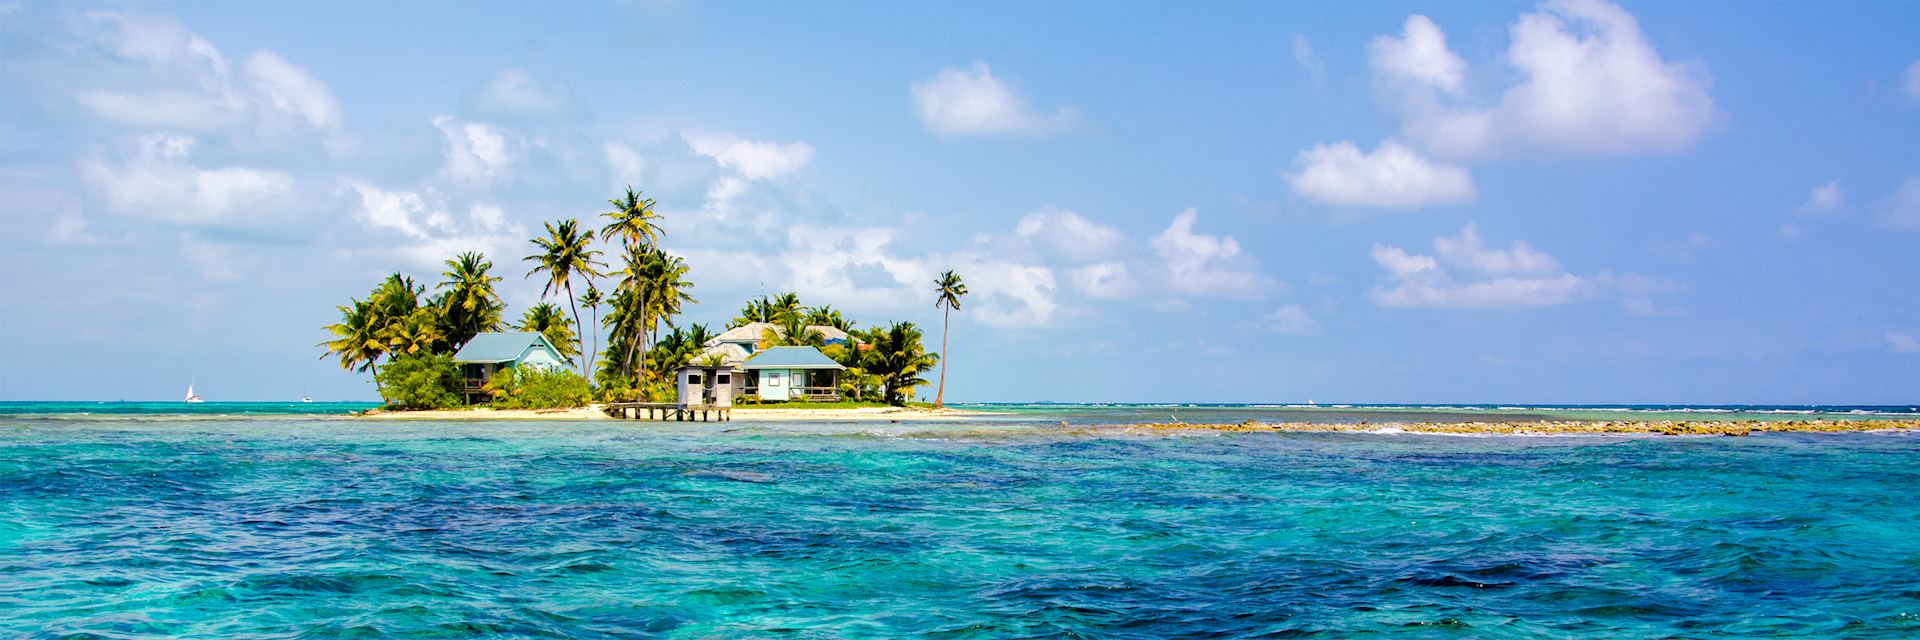 Secluded island, Belize